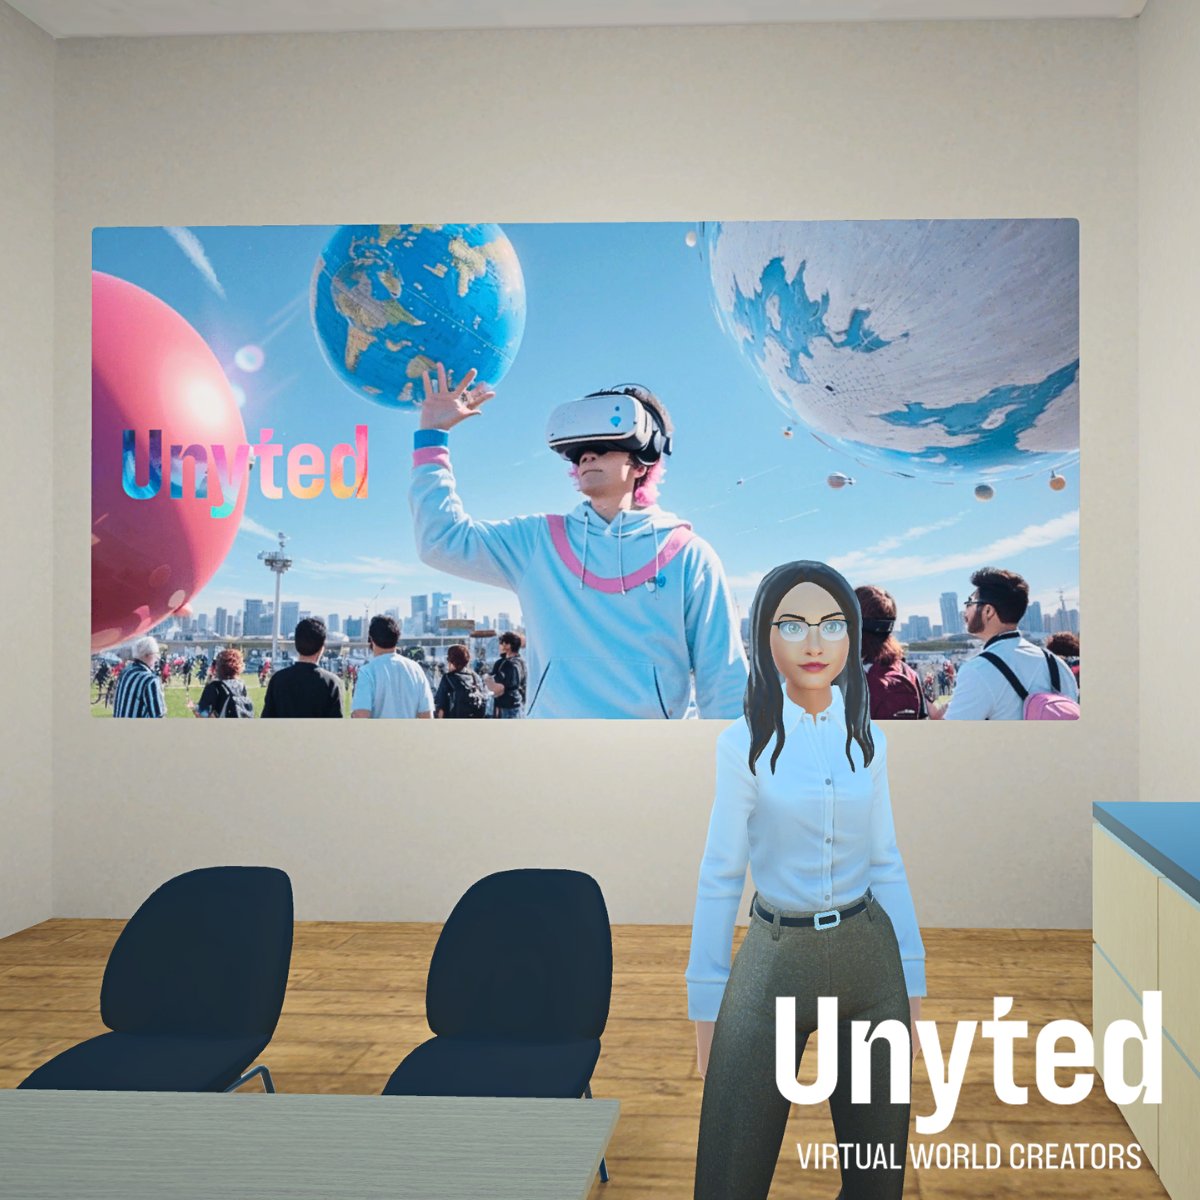 🌐 Revolutionize Education with Virtual Spaces! 🚀

🔮 Enhanced Engagement
📚 Improved Retention
💰 Cost Efficiency
🌍 Global Accessibility

Experience the future of learning with Unyted. 
Contact us today! 🌟 
#Education #VirtualSpaces #Metaverse